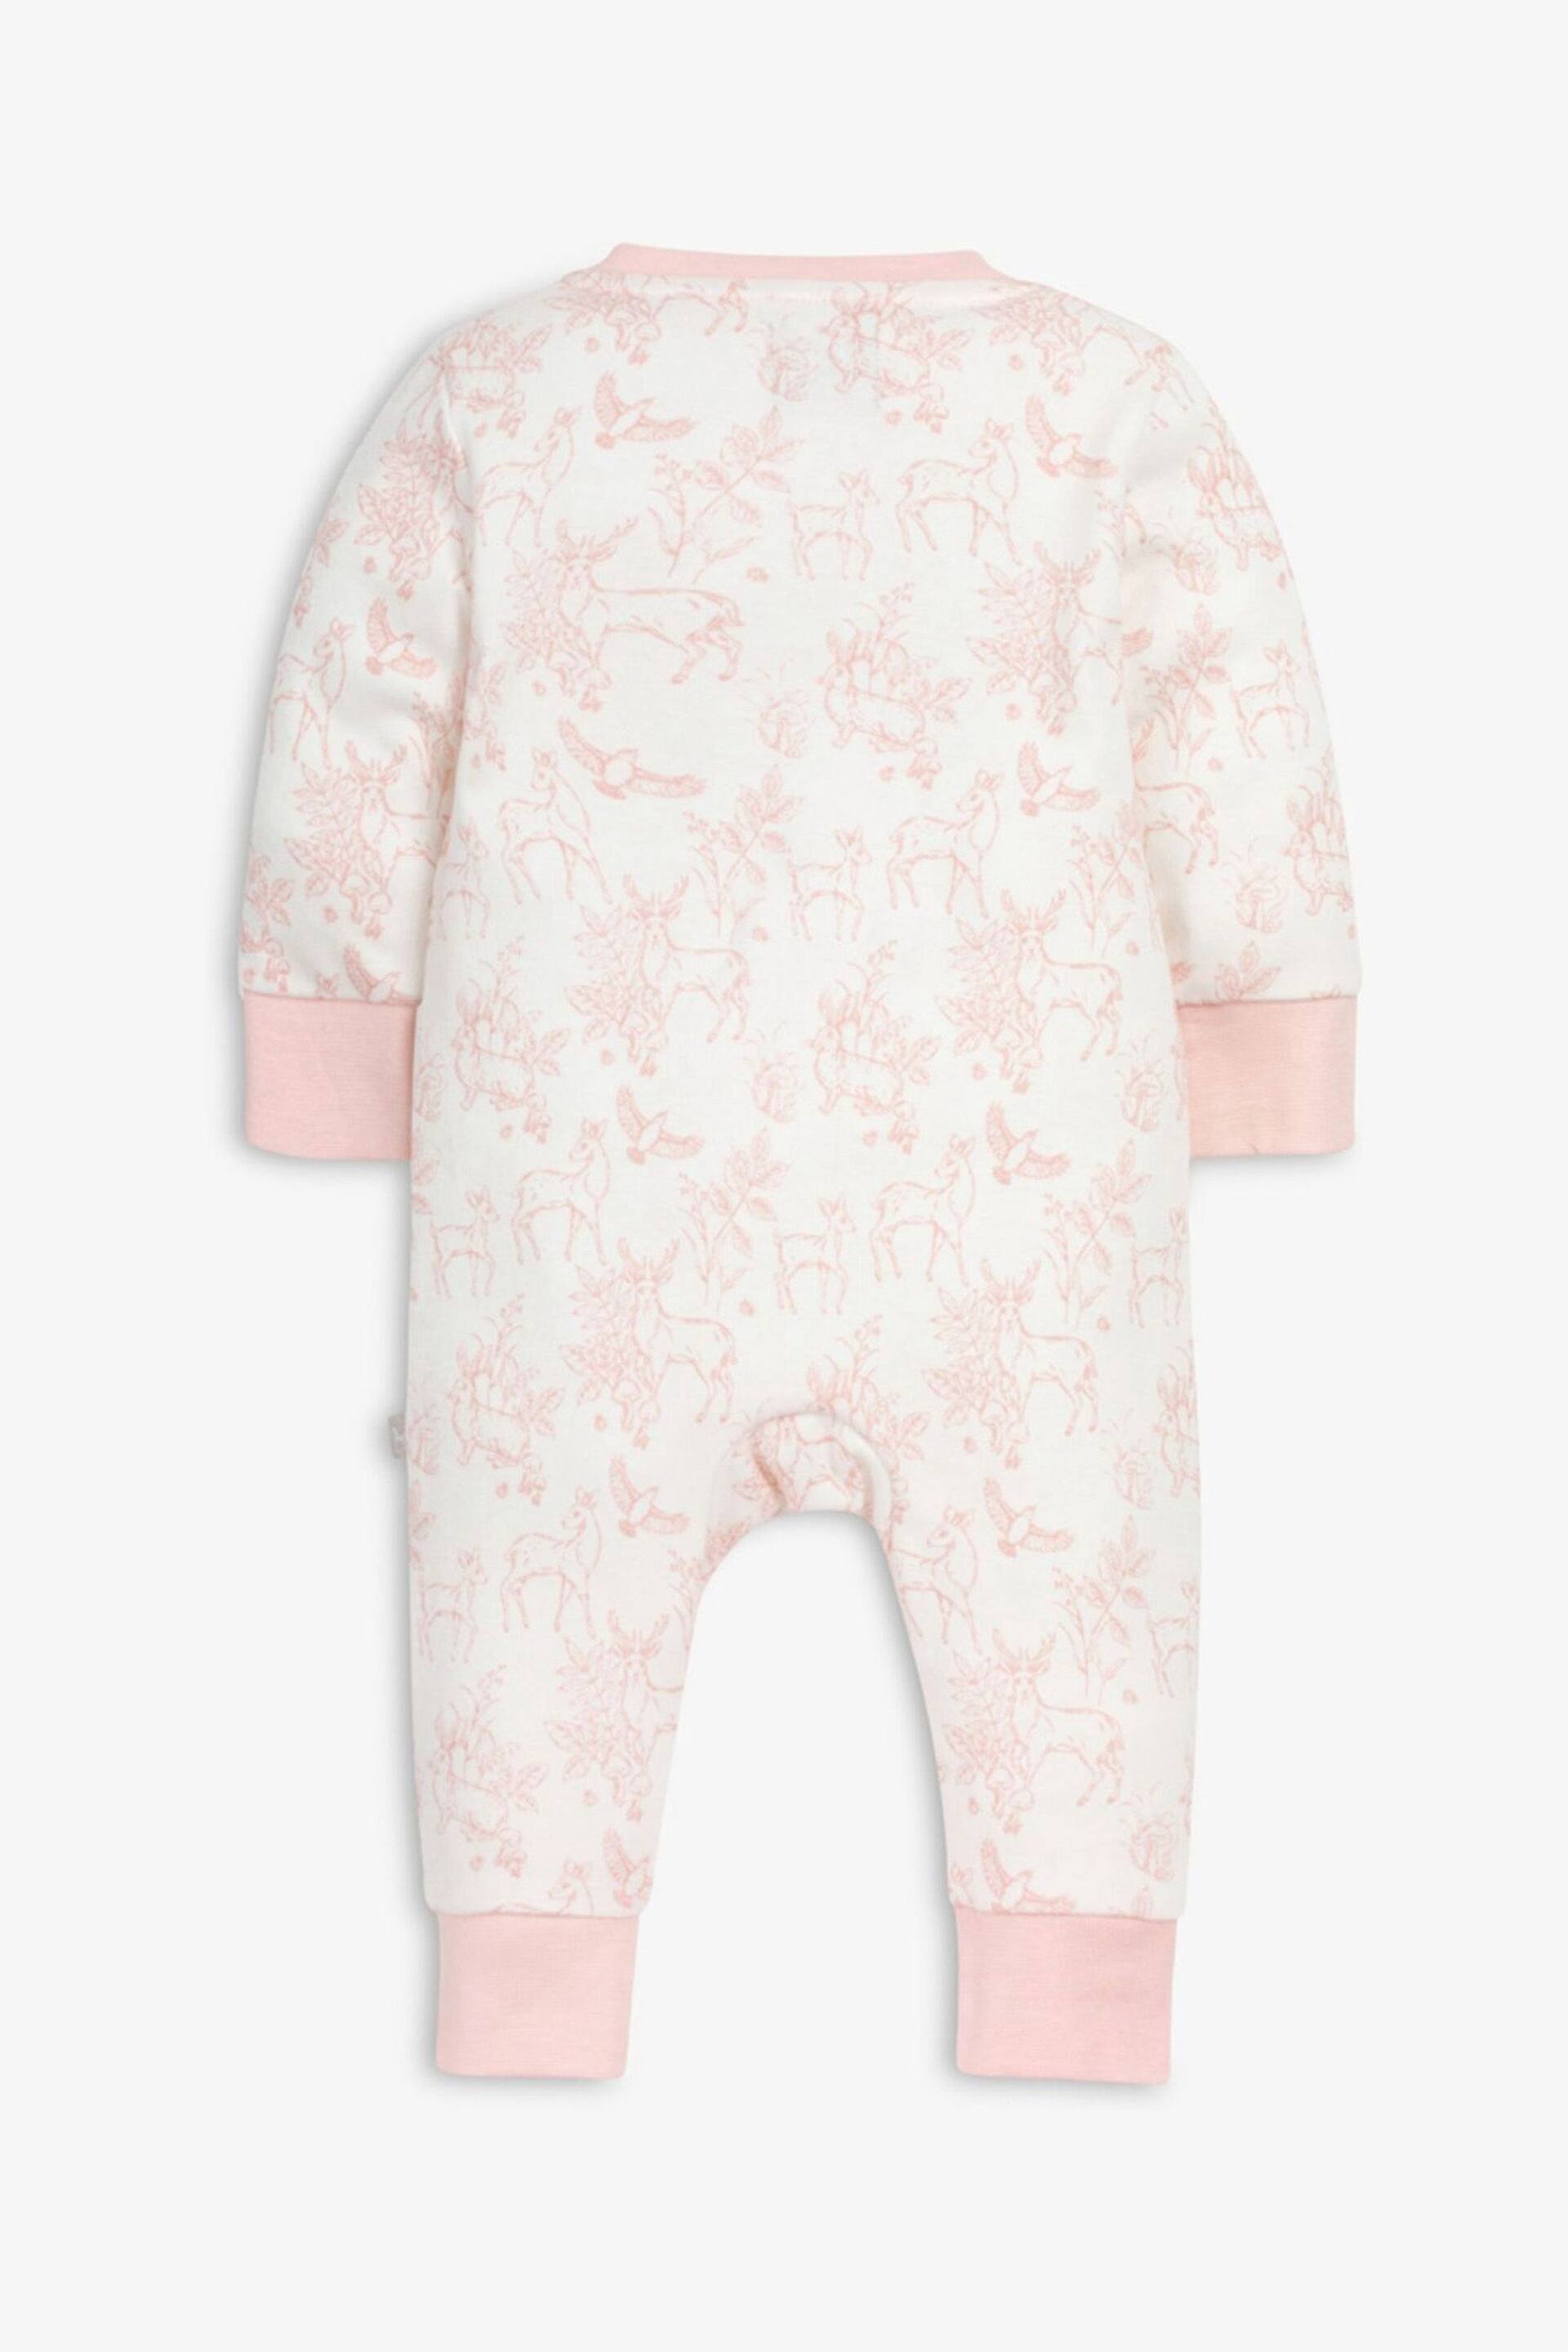 The Little Tailor Baby Front Zip Easter Bunny Print Soft Cotton Sleepsuit - Image 3 of 5